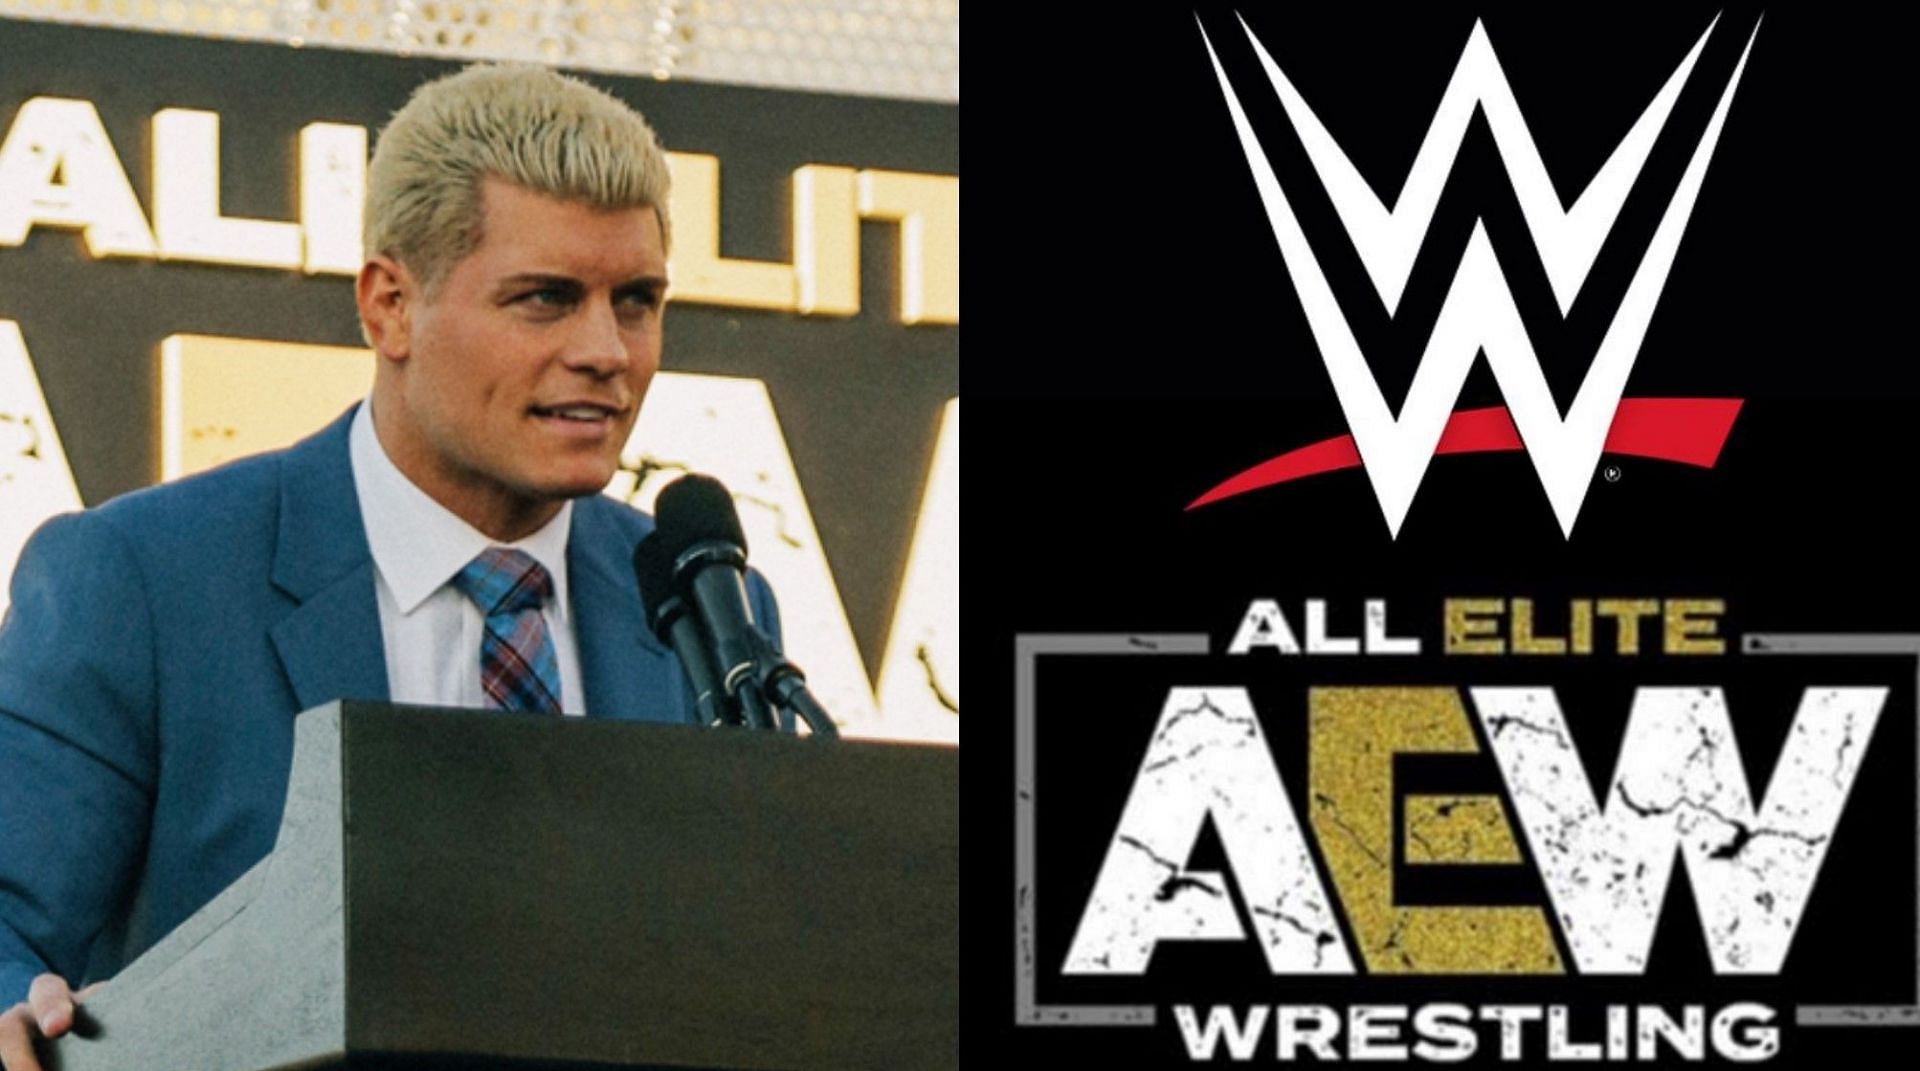 Cody Rhodes also serves as the EVP of AEW!